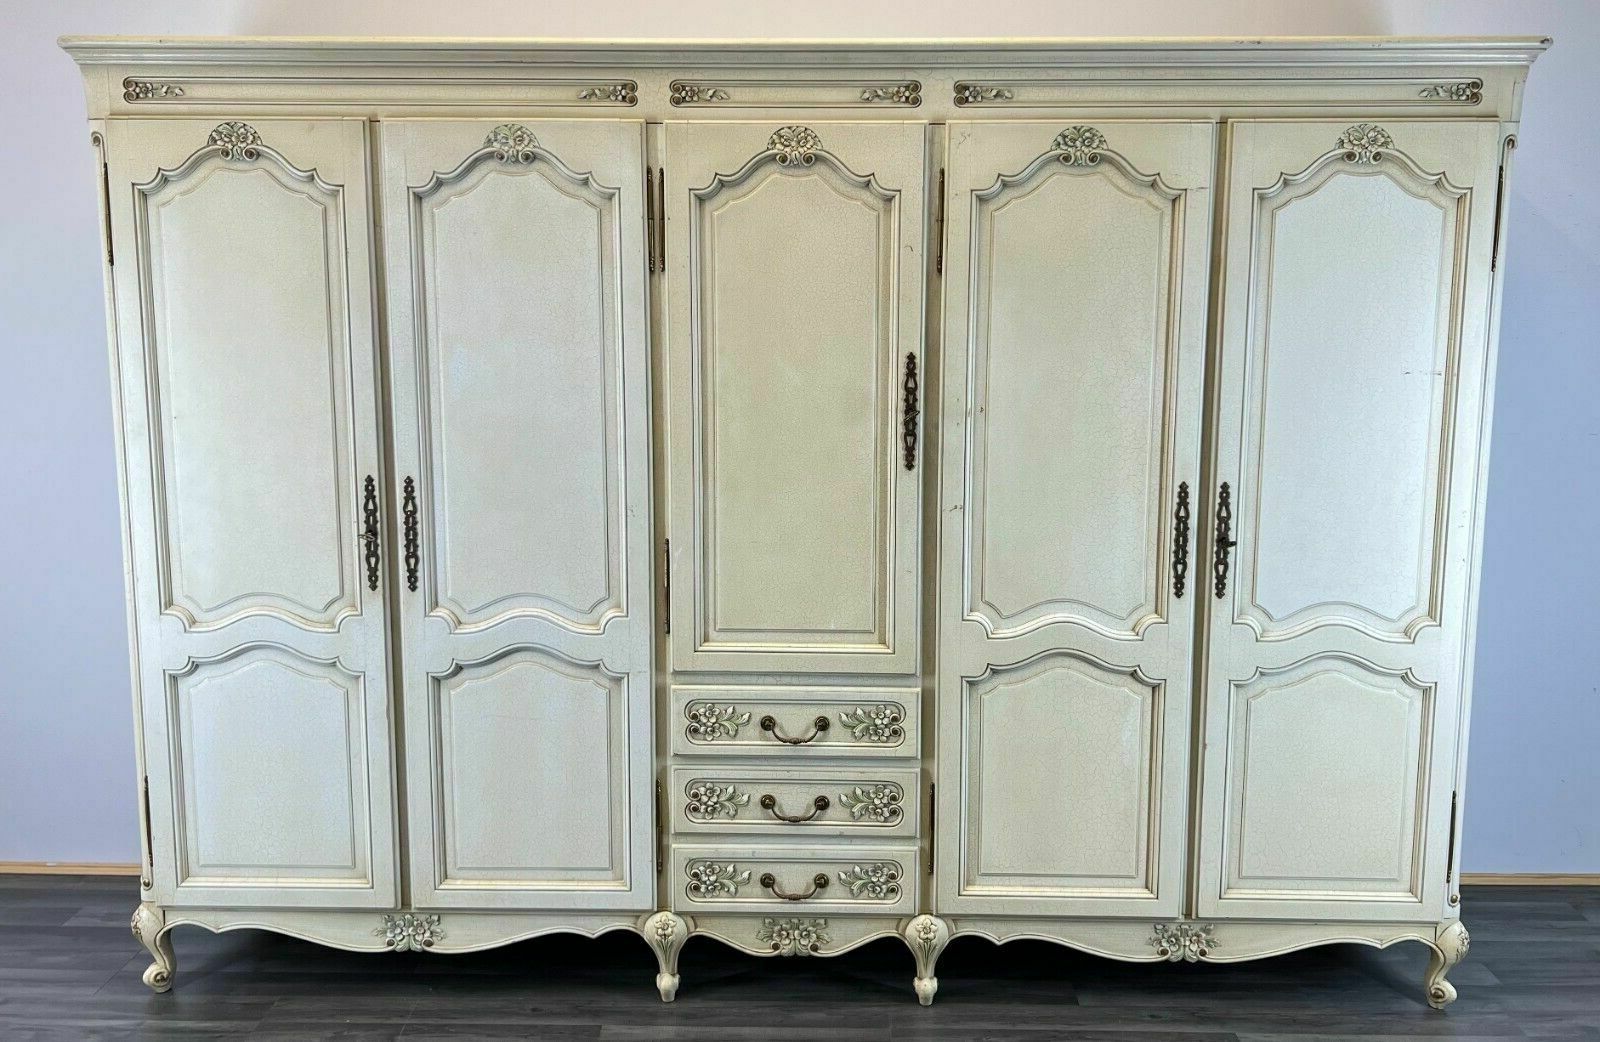 Louis Xv Style Shabby Chic French Carved 5 Door Armoire Wardrobe | Vinterior Within French Shabby Chic Wardrobes (View 15 of 20)